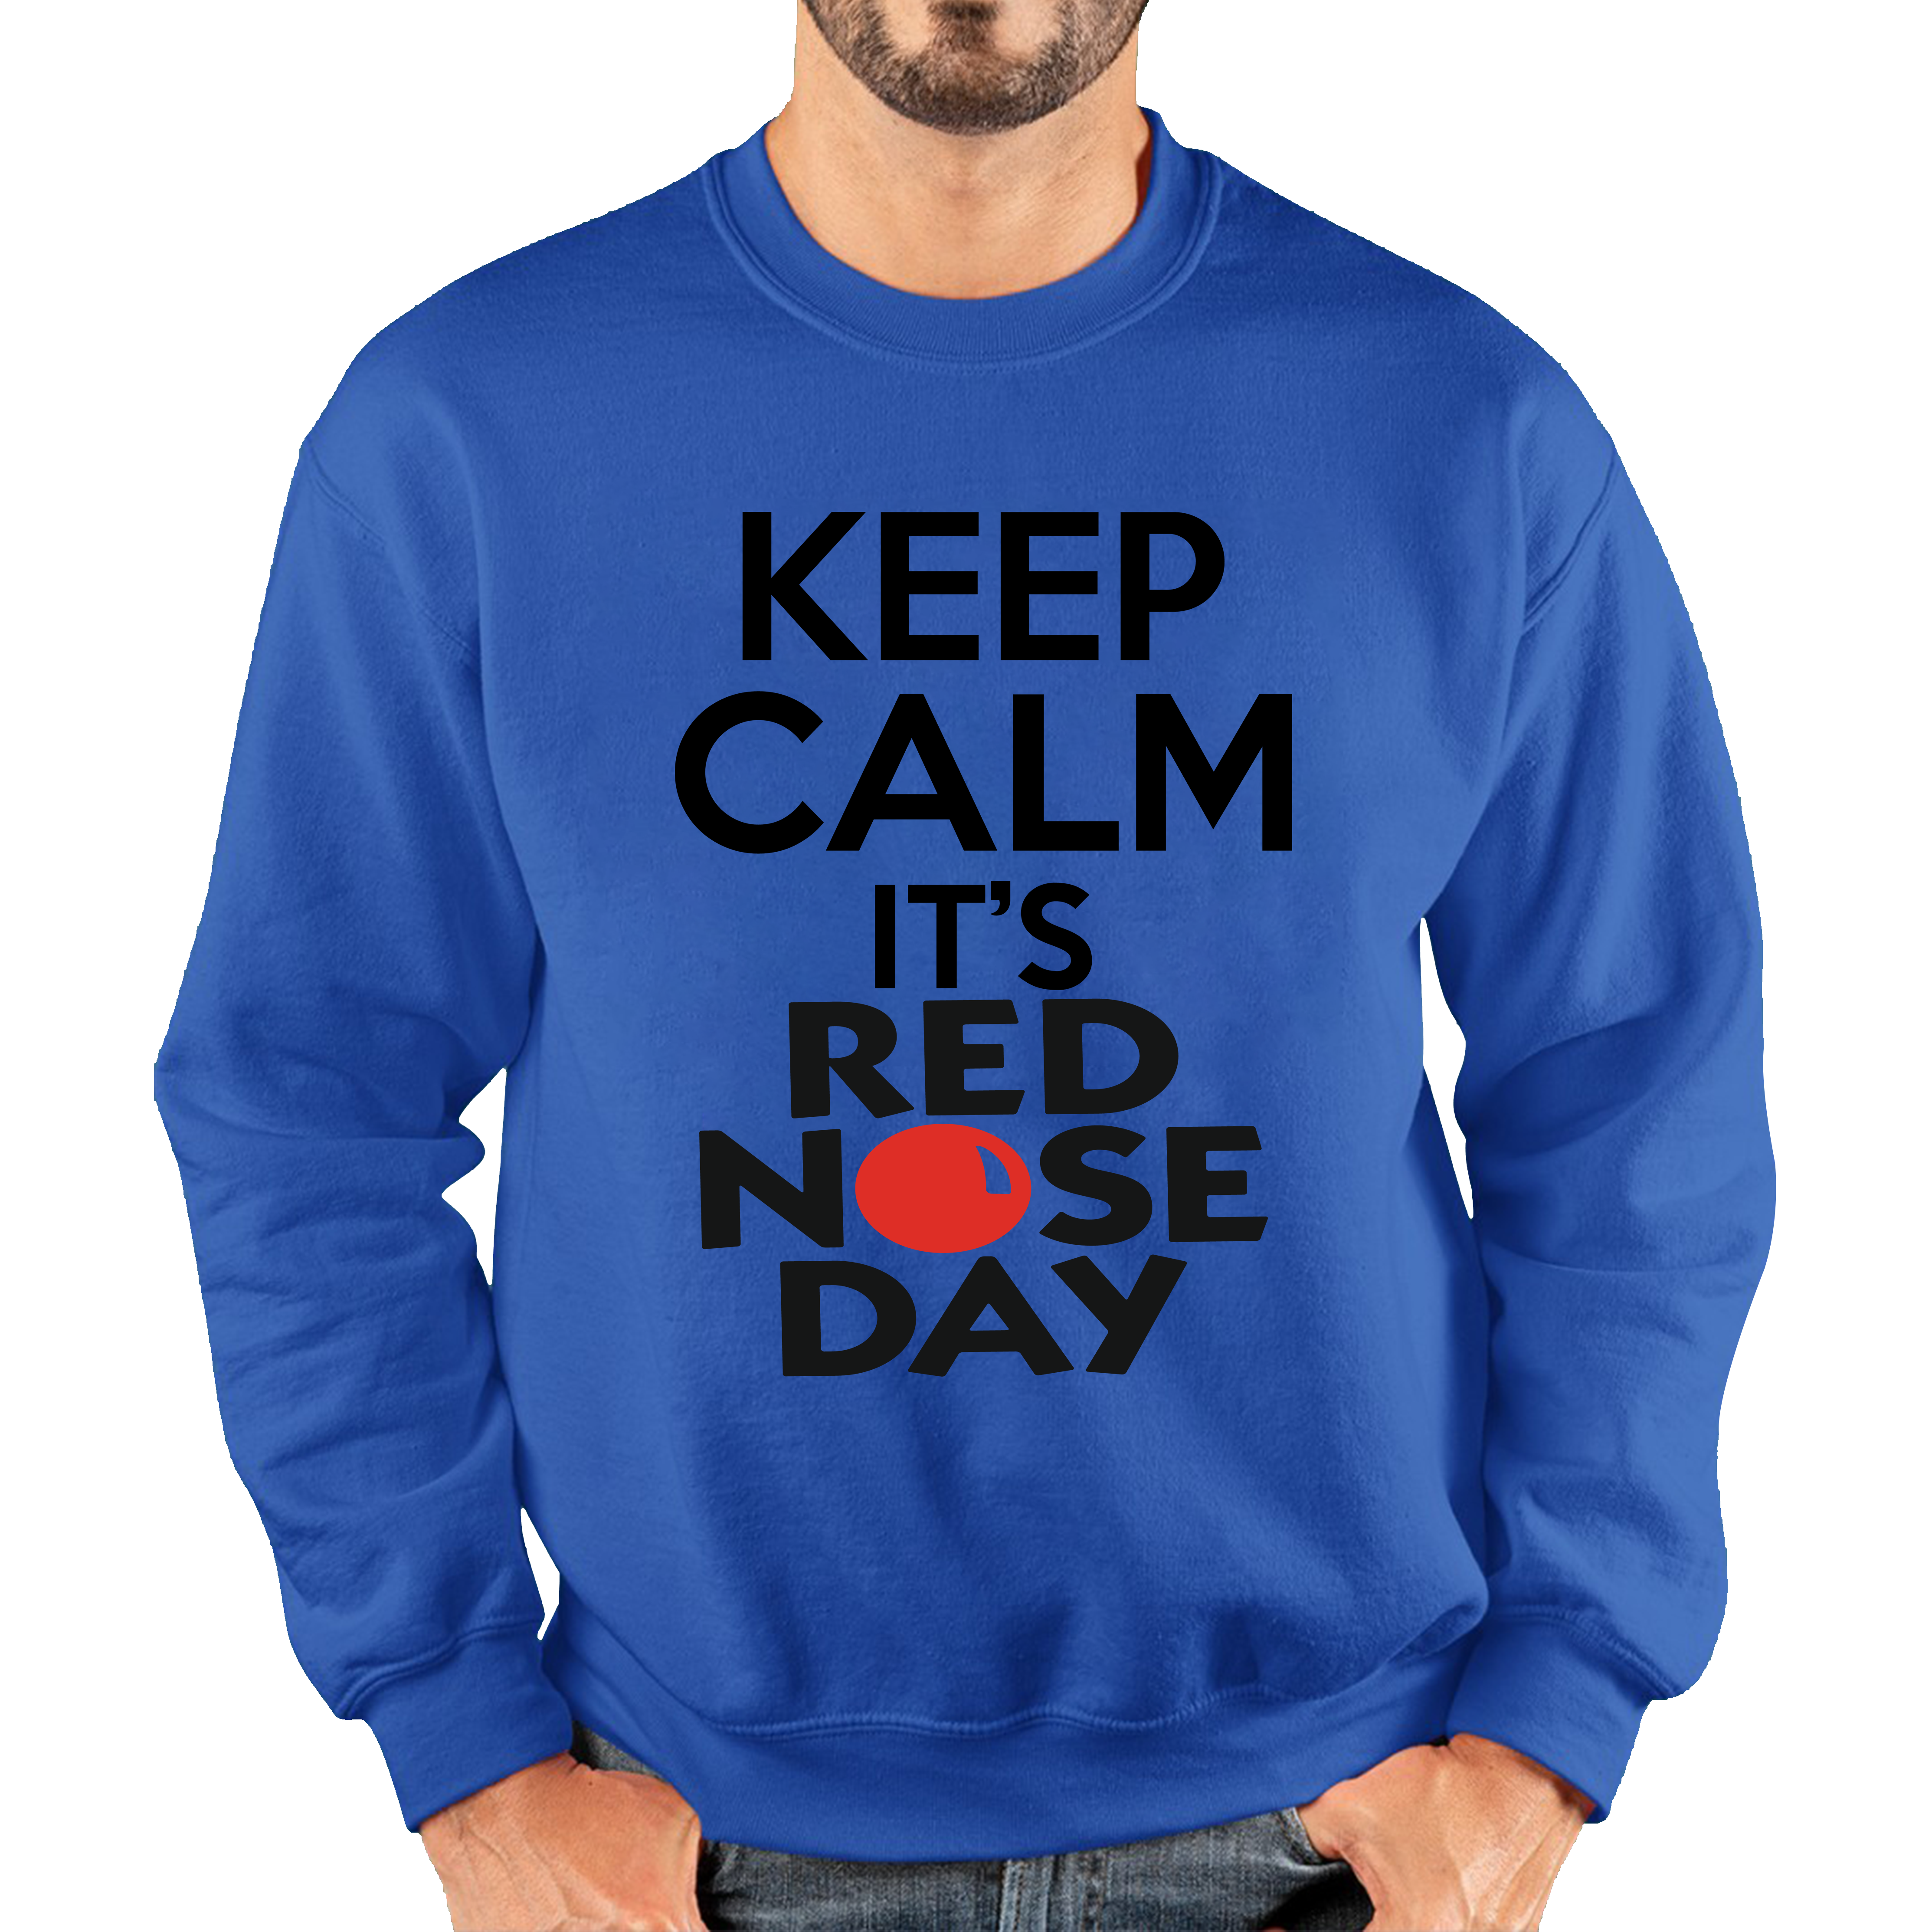 Keep Calm It's Red Nose Day Adult Sweatshirt. 50% Goes To Charity